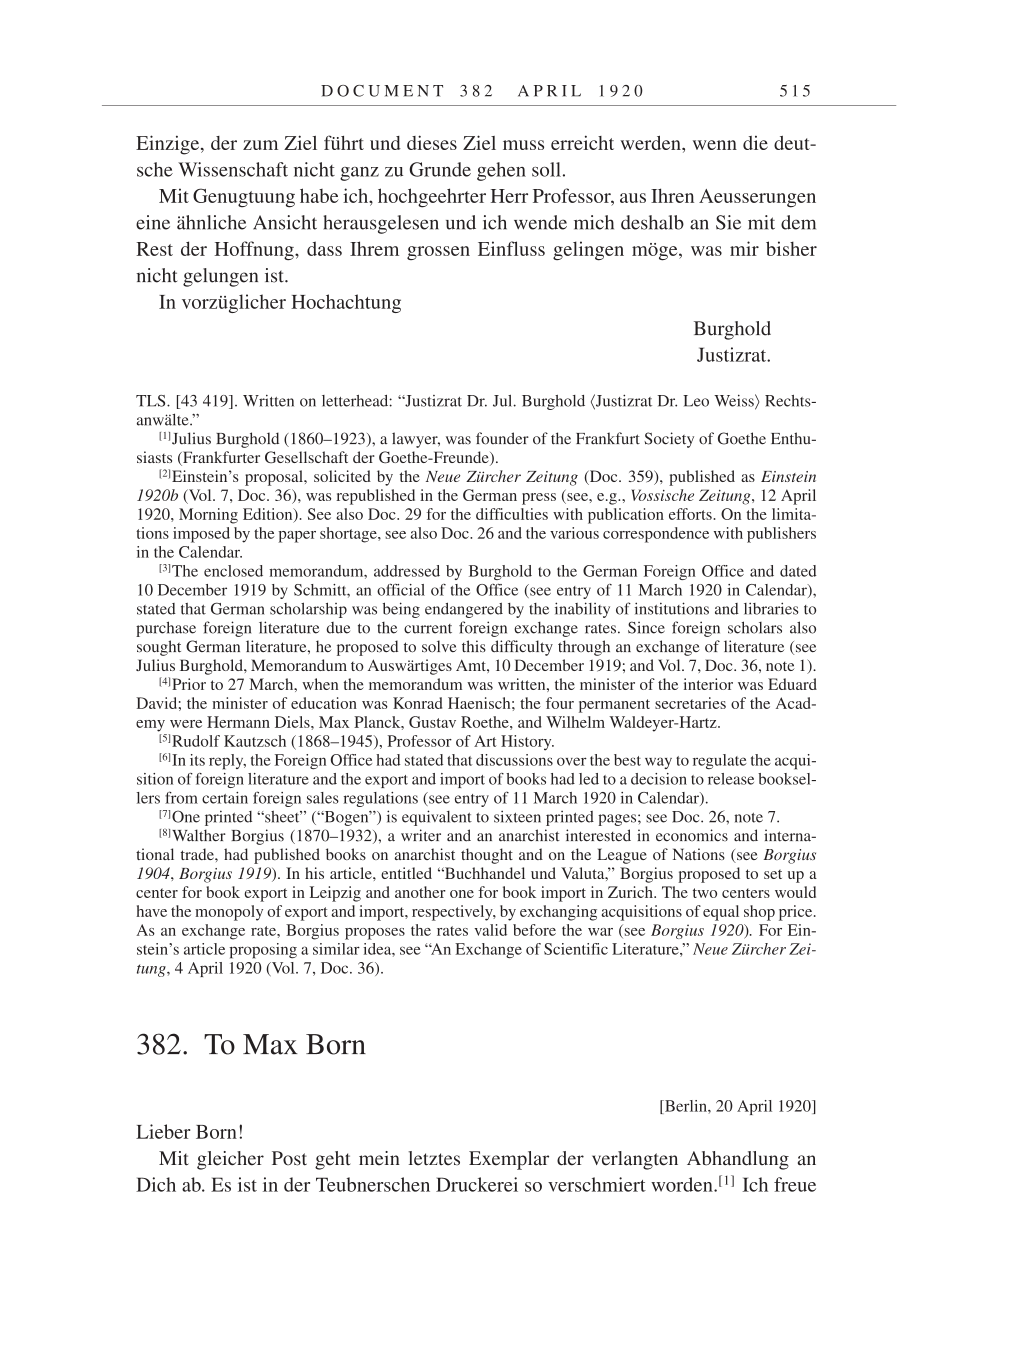 Volume 9: The Berlin Years: Correspondence January 1919-April 1920 page 515